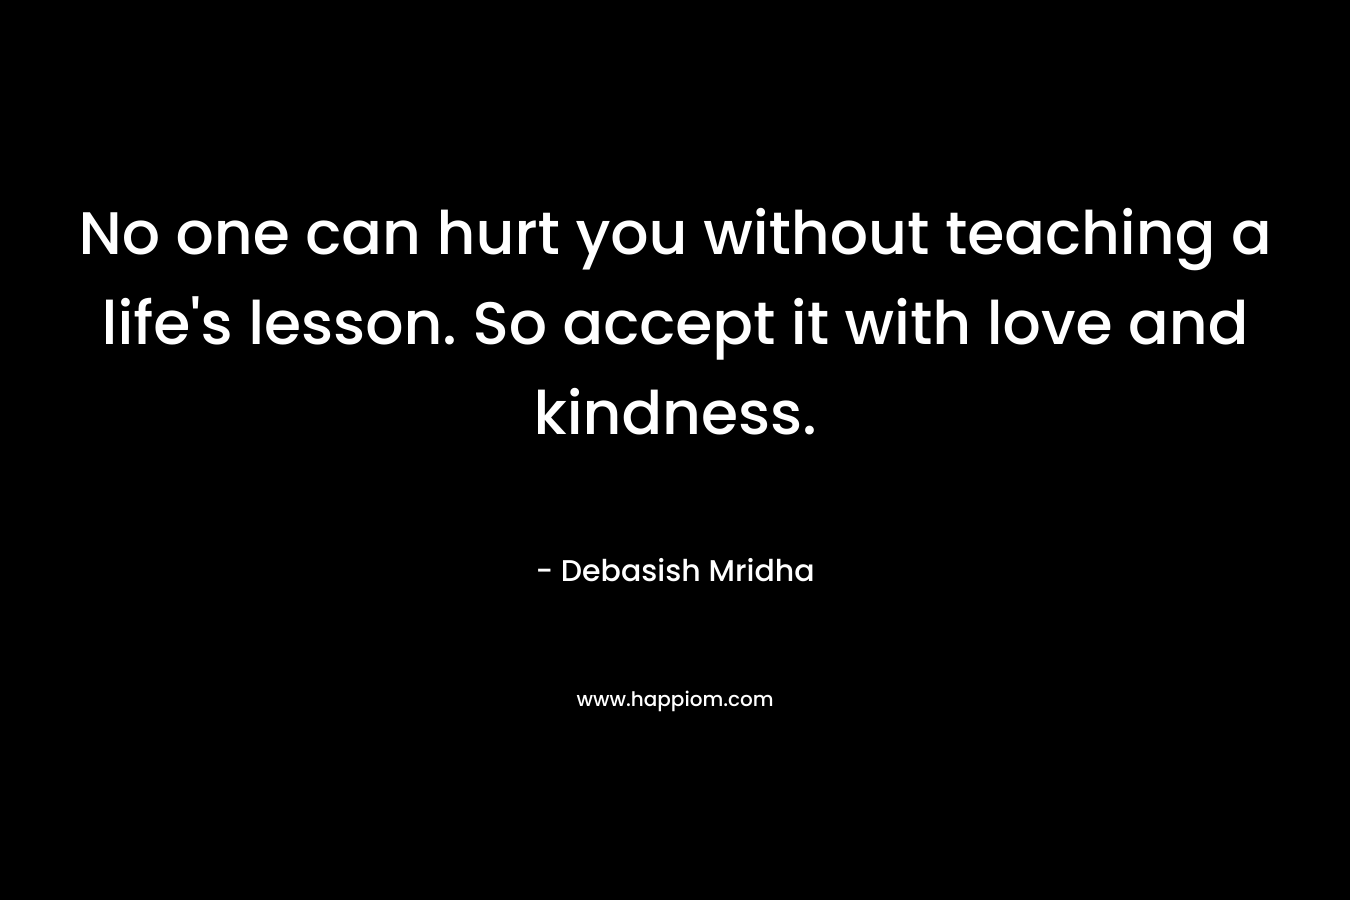 No one can hurt you without teaching a life's lesson. So accept it with love and kindness.